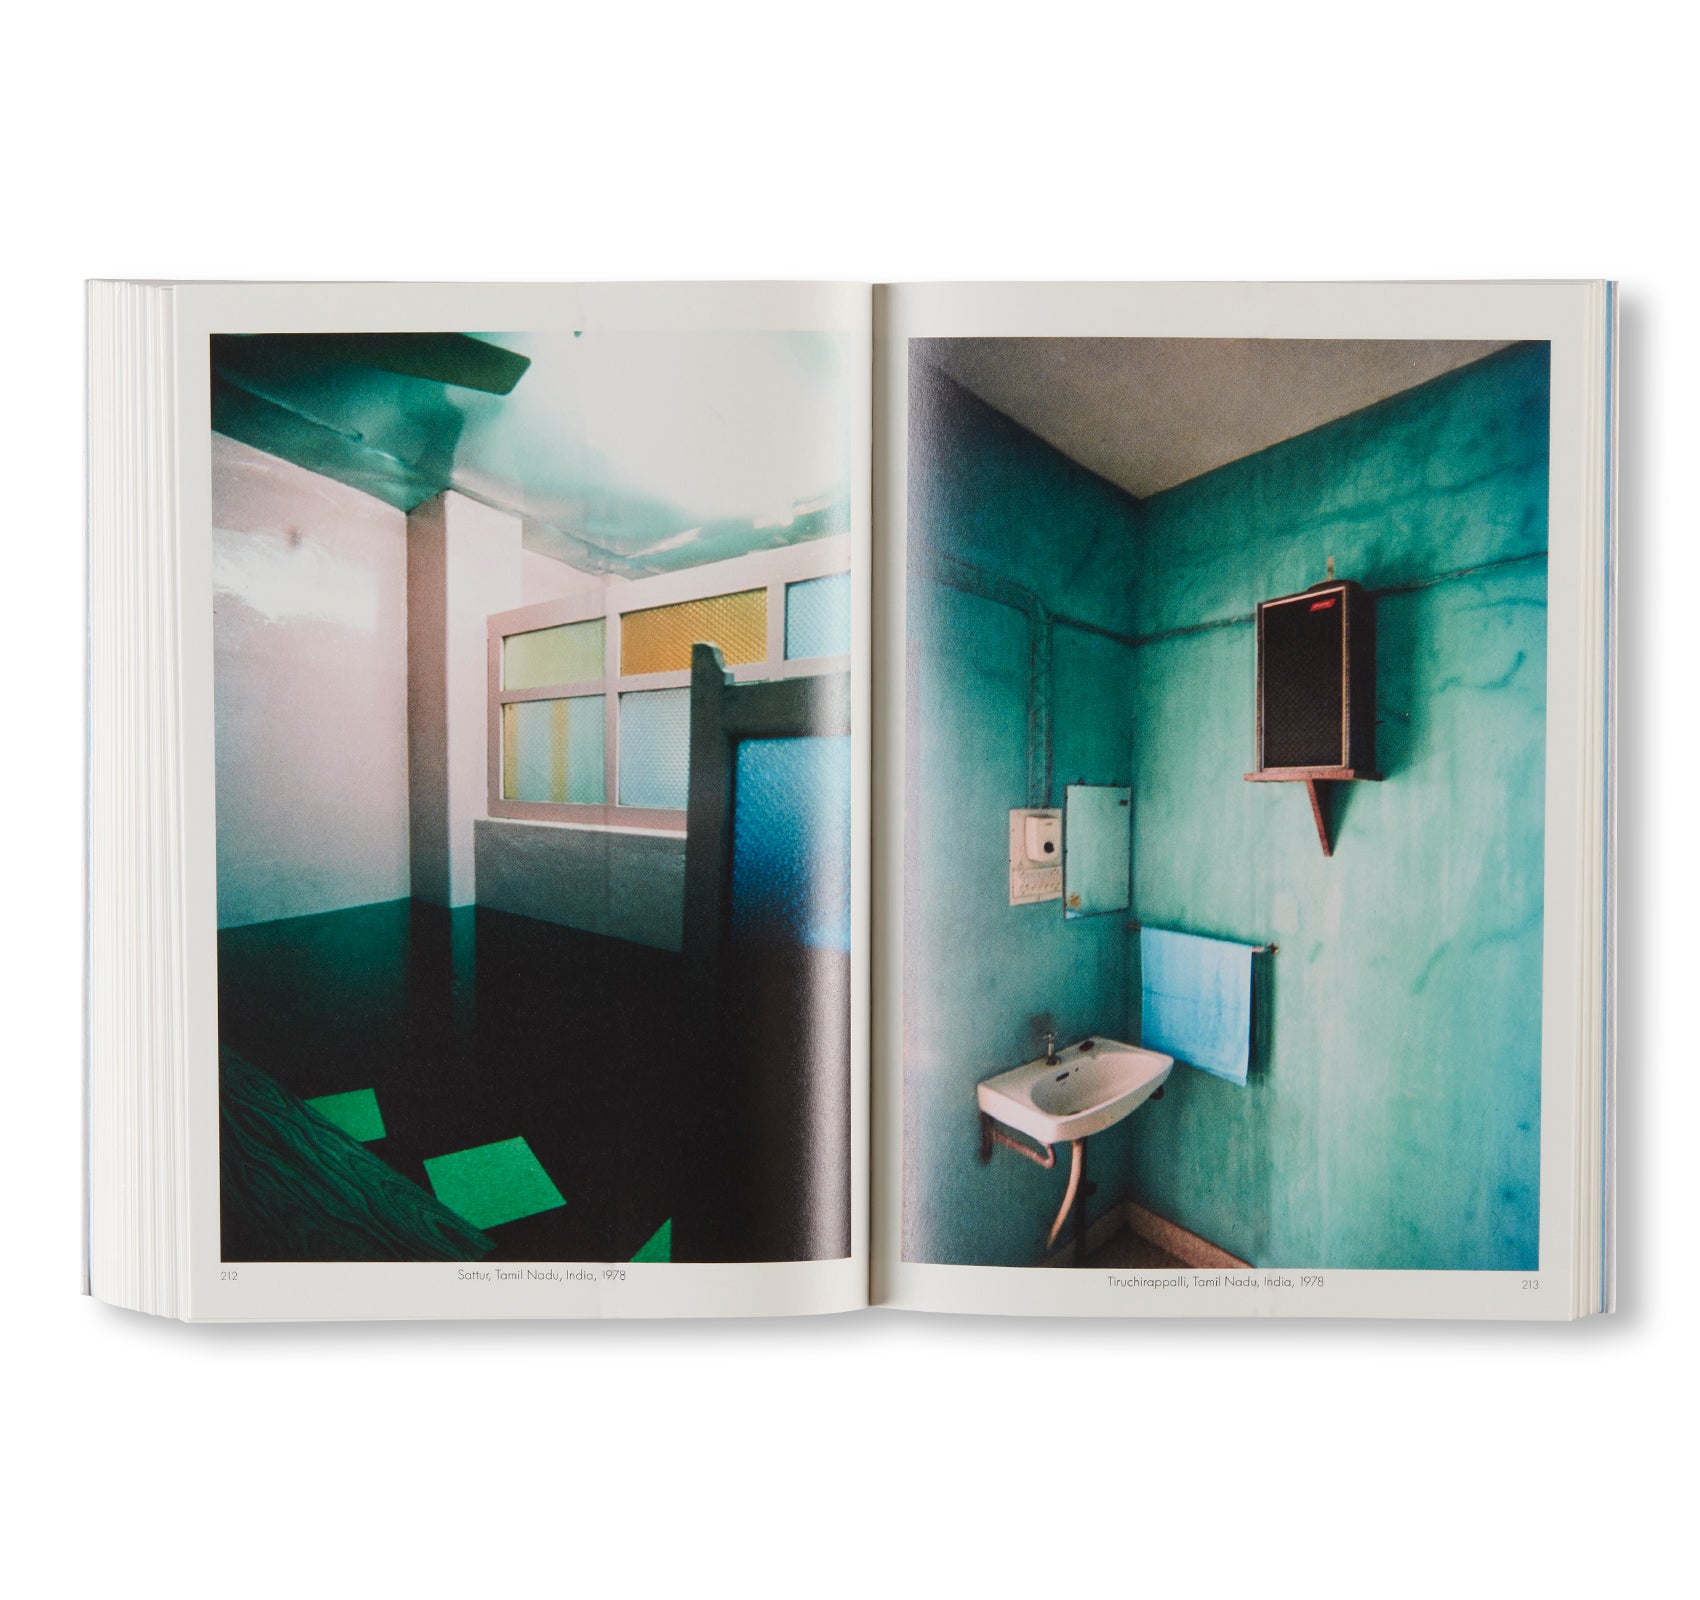 THERE IS A PLANET. TEXTS AND PHOTOGRAPHS by Ettore Sottsass